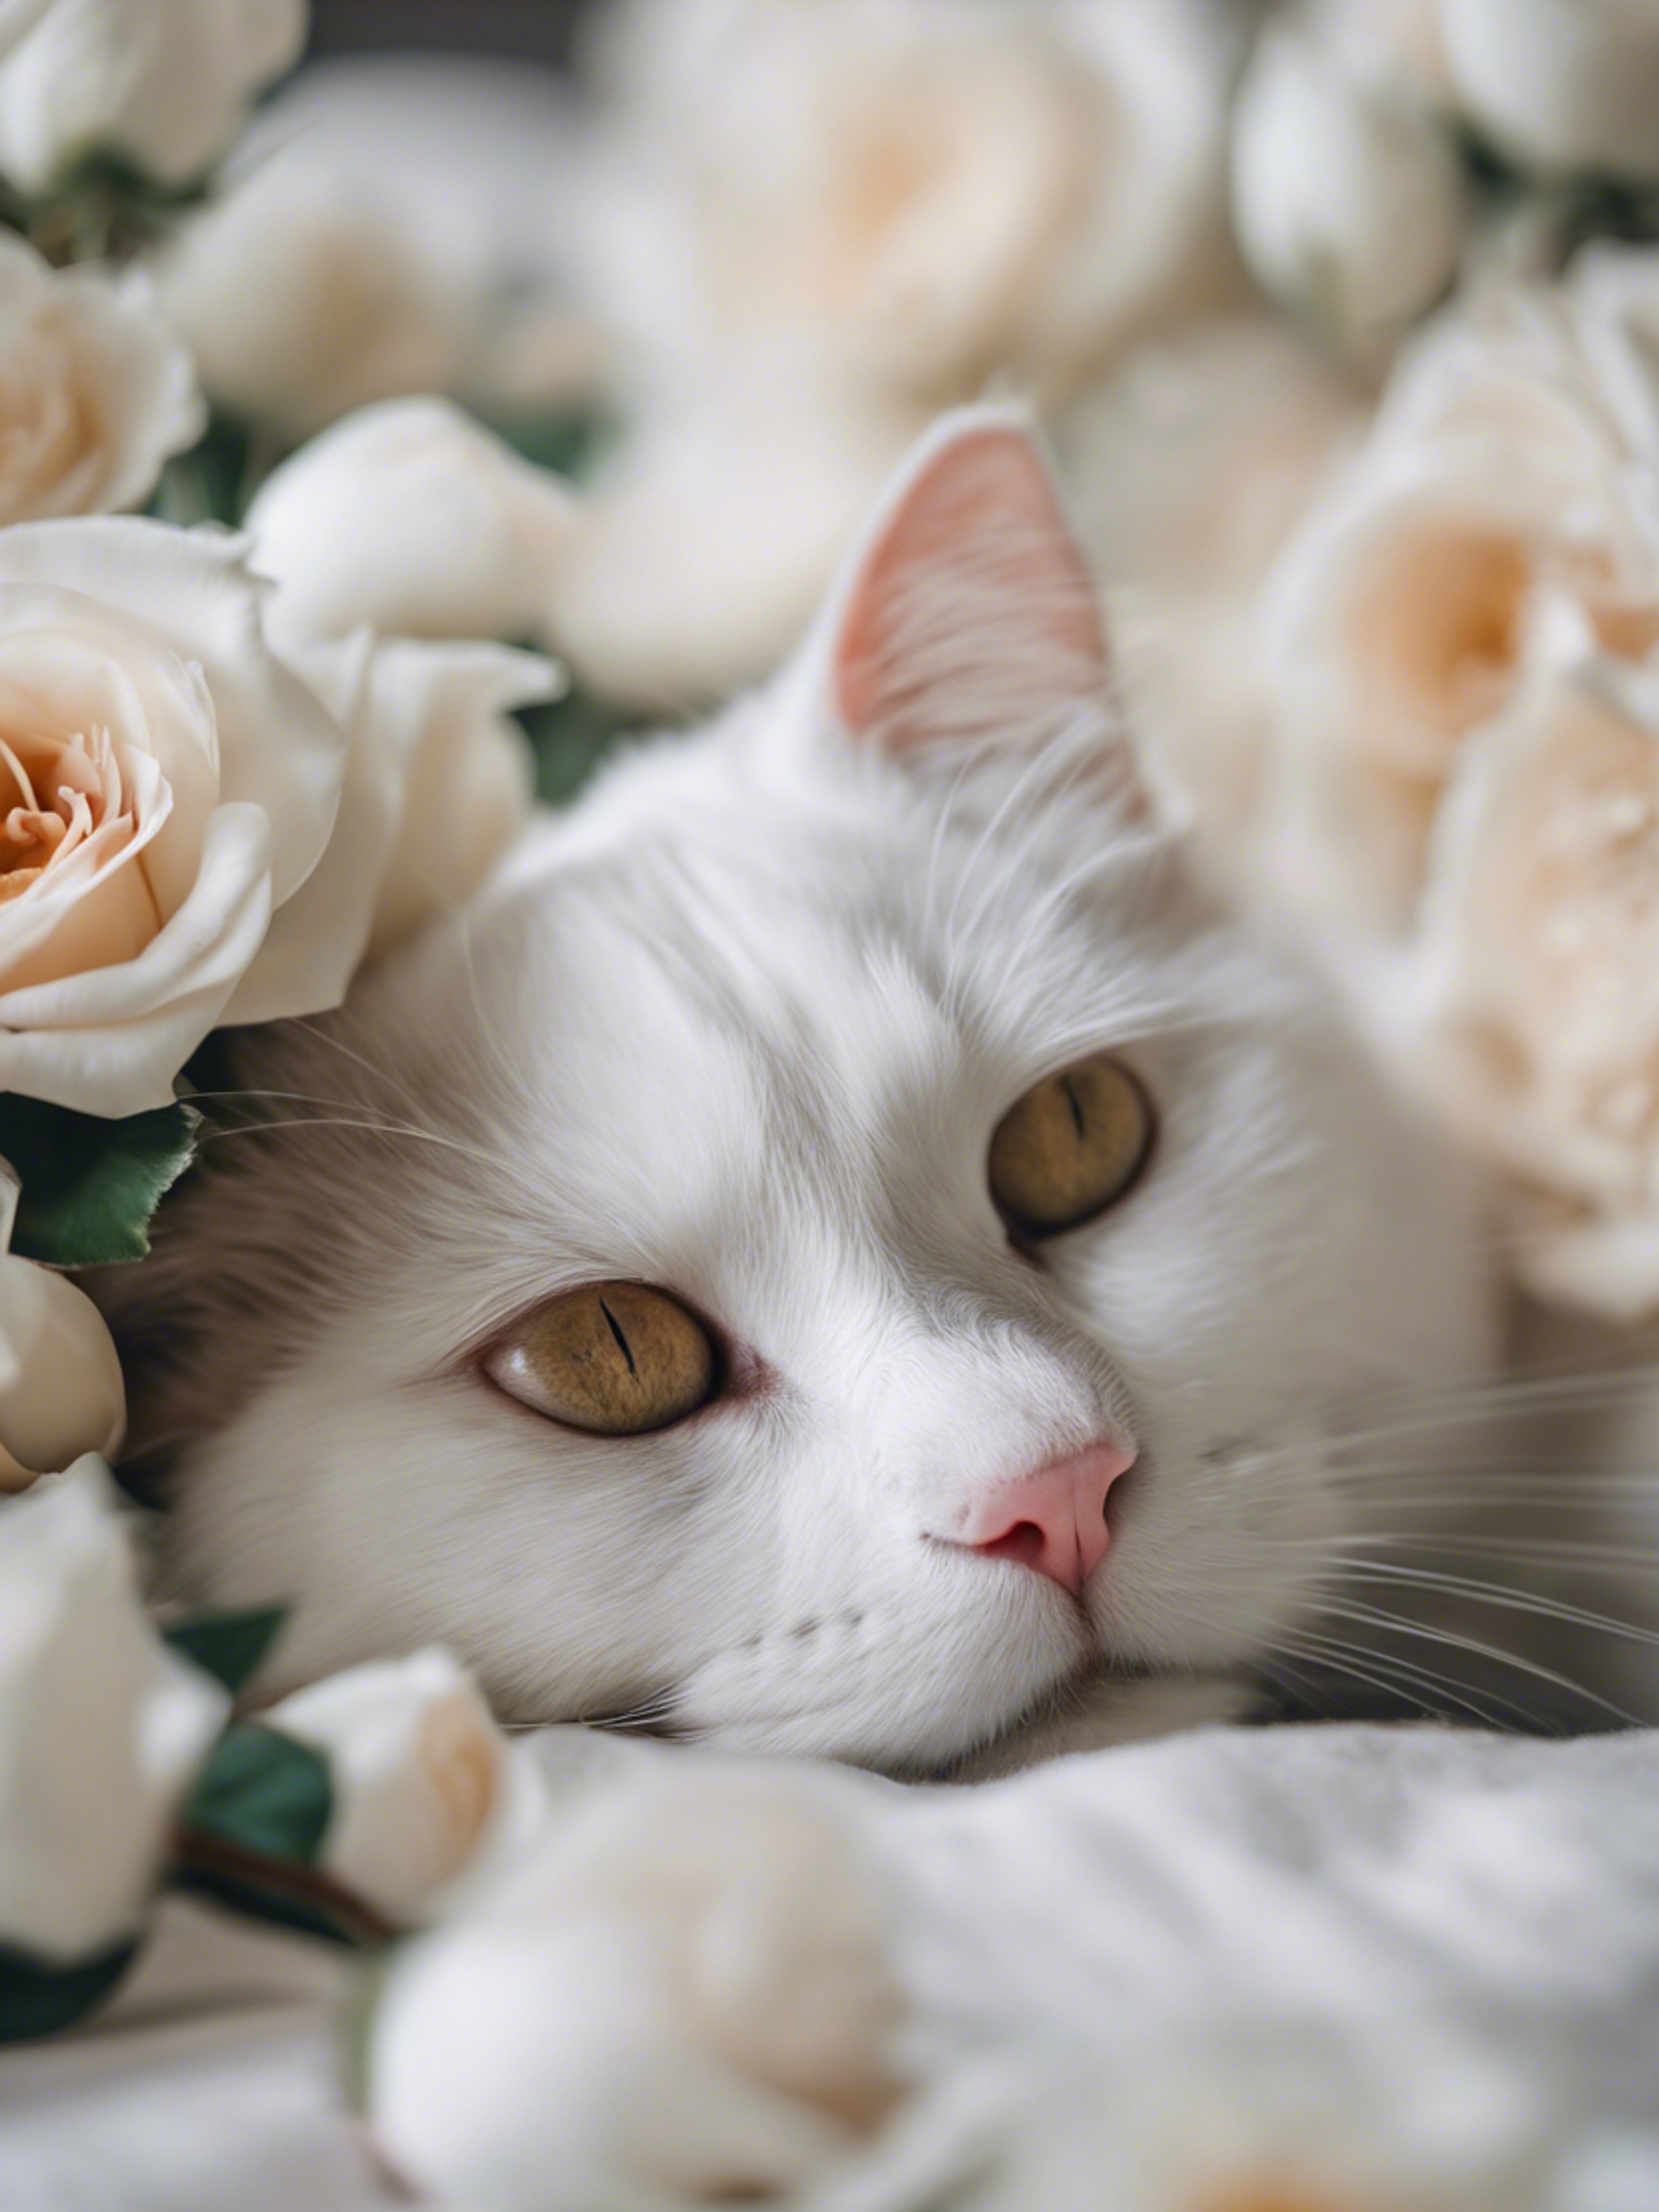 A picturesque content white cat sleeping amidst a bed of white roses. ផ្ទាំង​រូបភាព[21bd514b84c74c92a754]